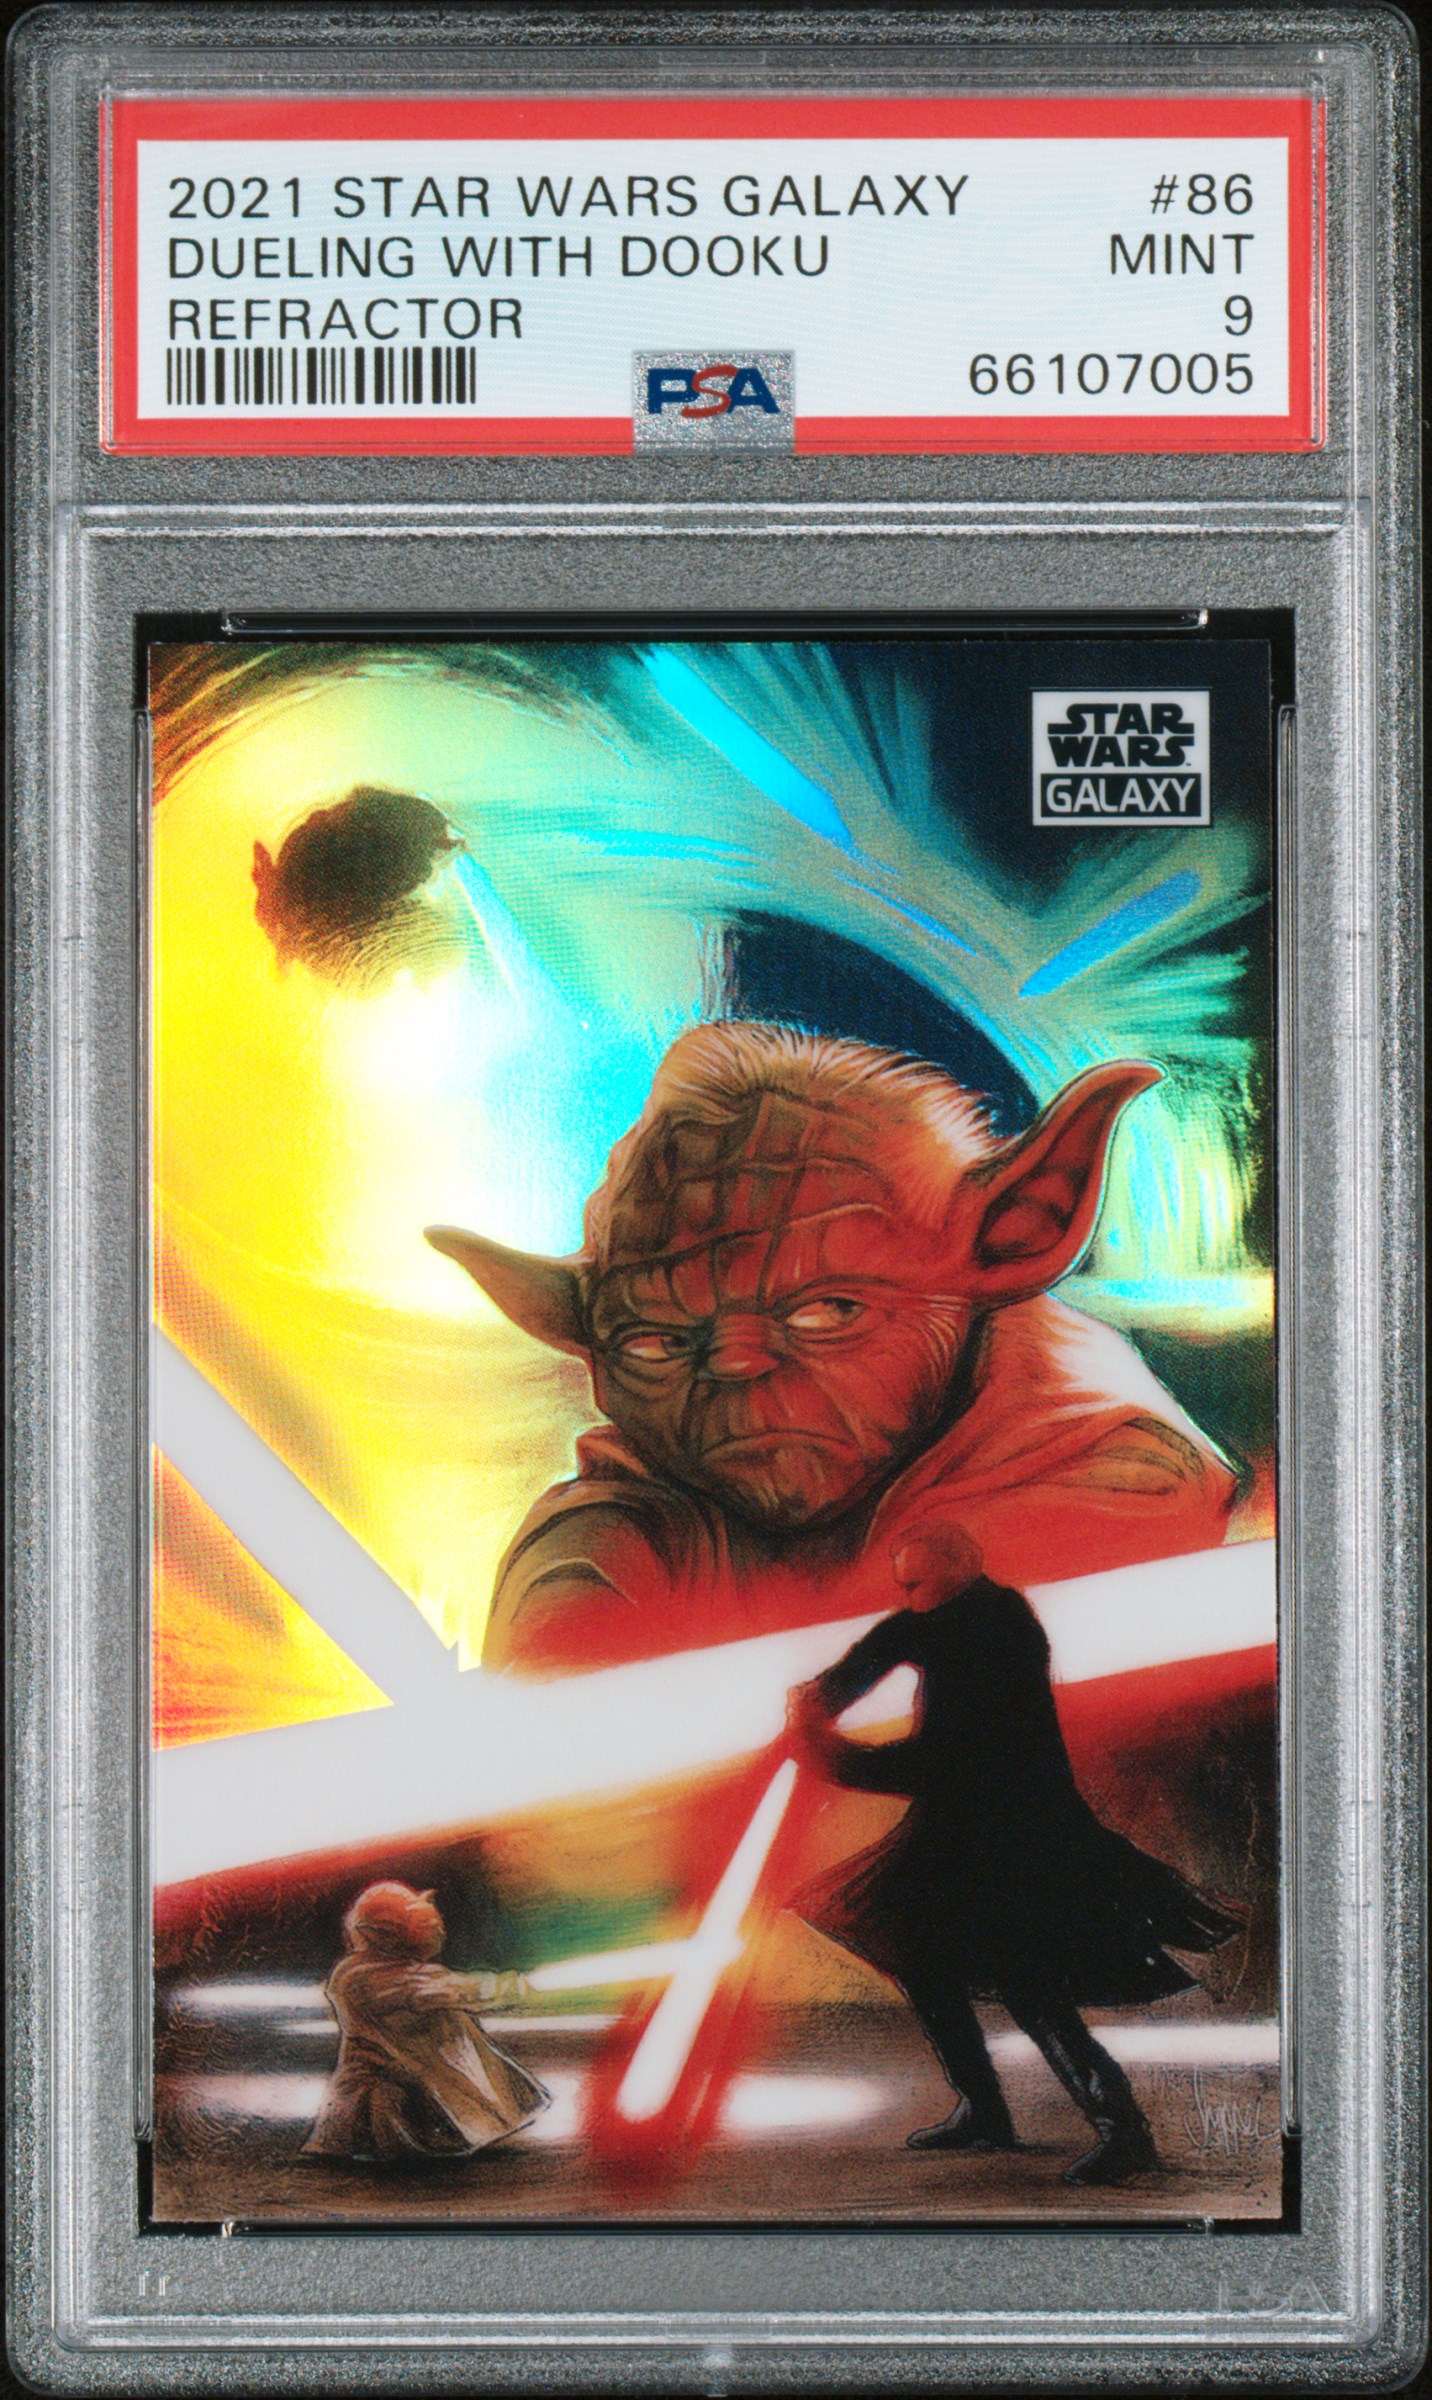 2021 Topps Chrome Star Wars Galaxy Refractor #86 Dueling With Dooku – PSA MINT 9